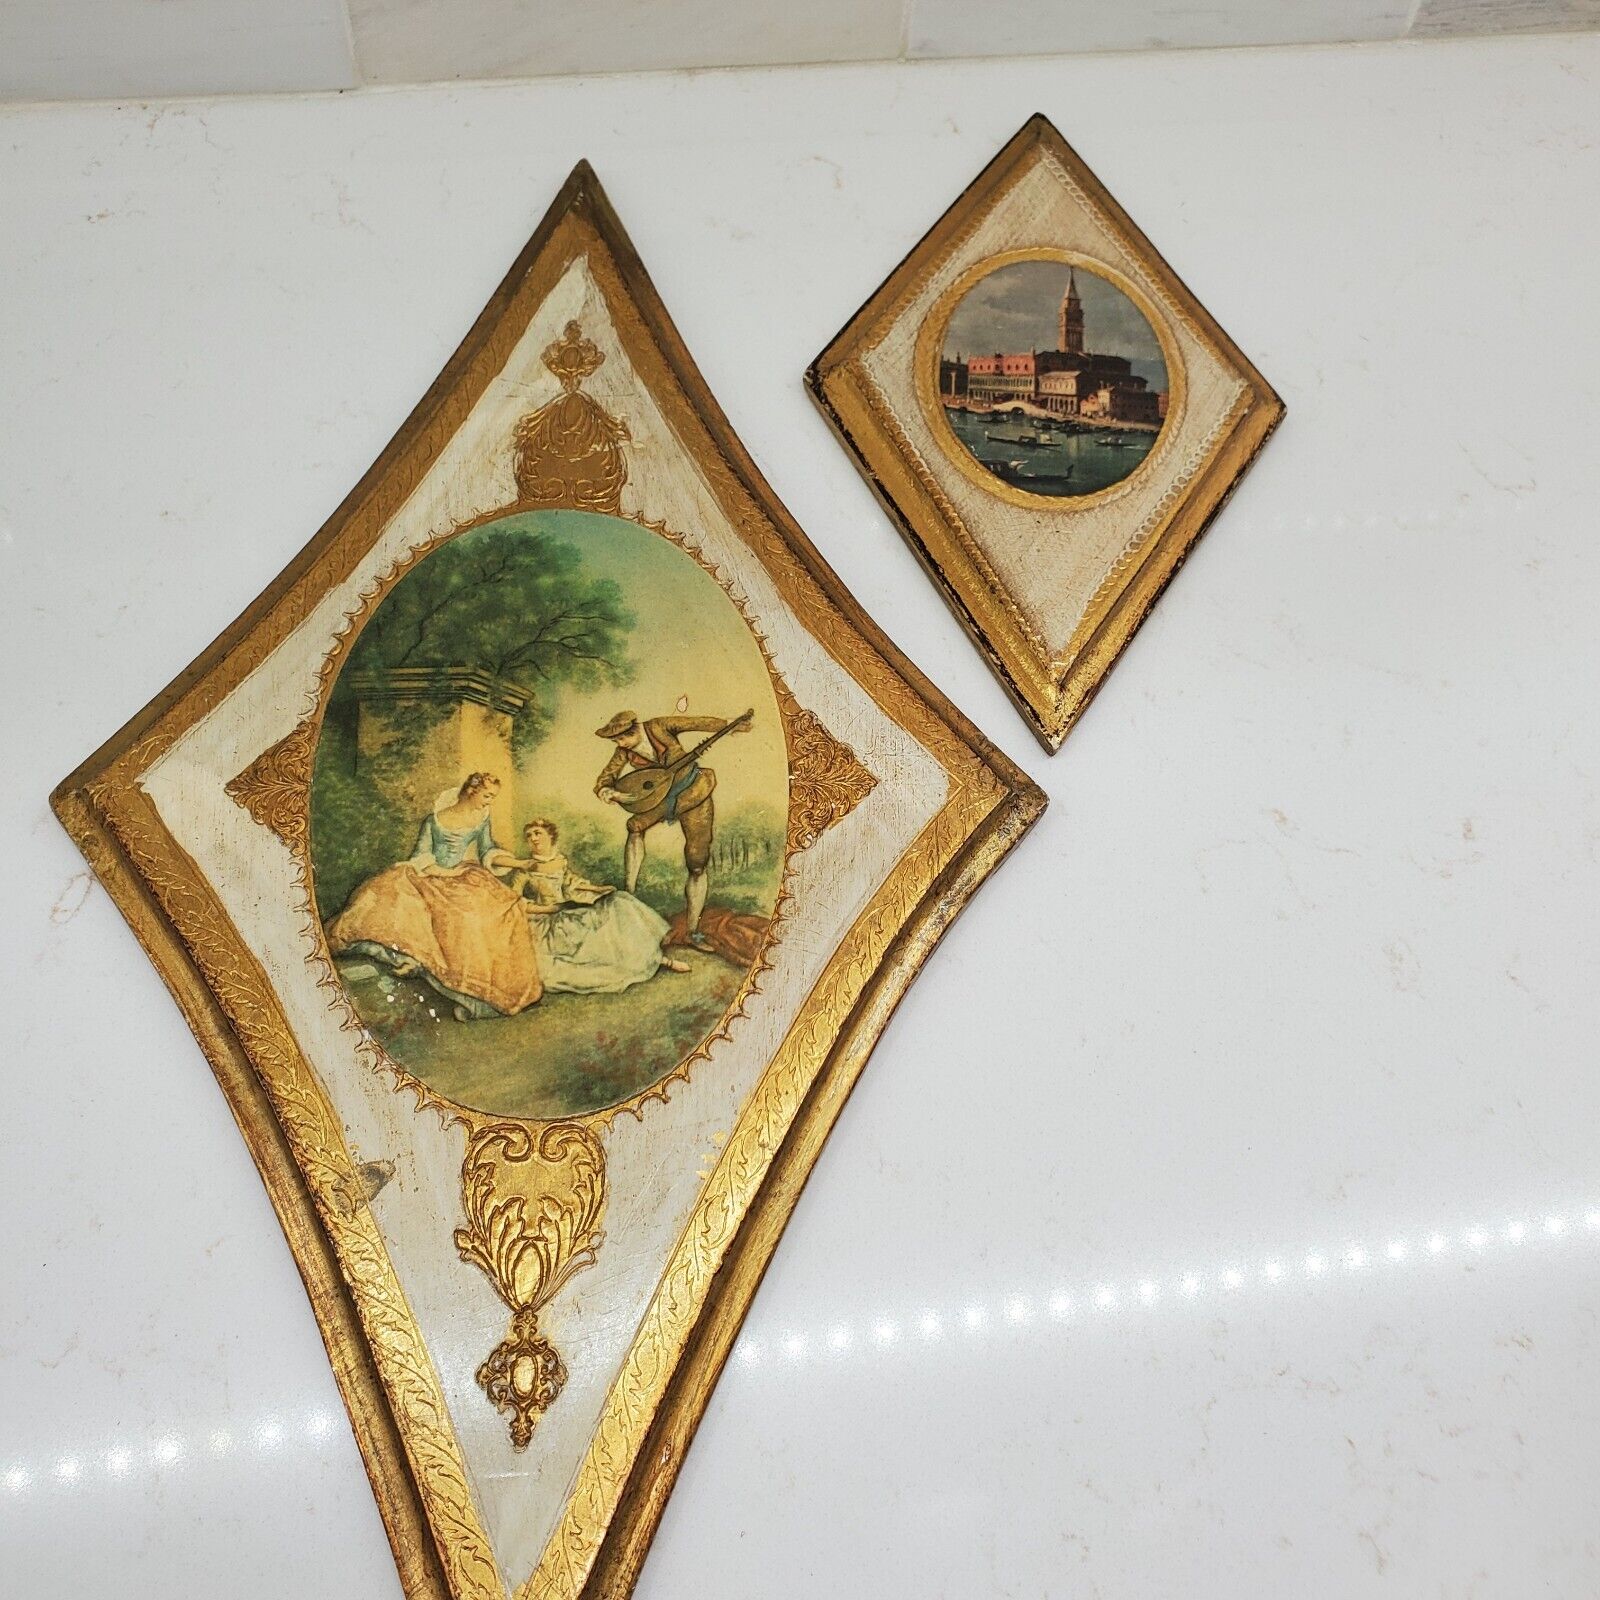 Pair of Vintage Italian Florentine Wood Wall Plaques Art Hanging Sterner Imports